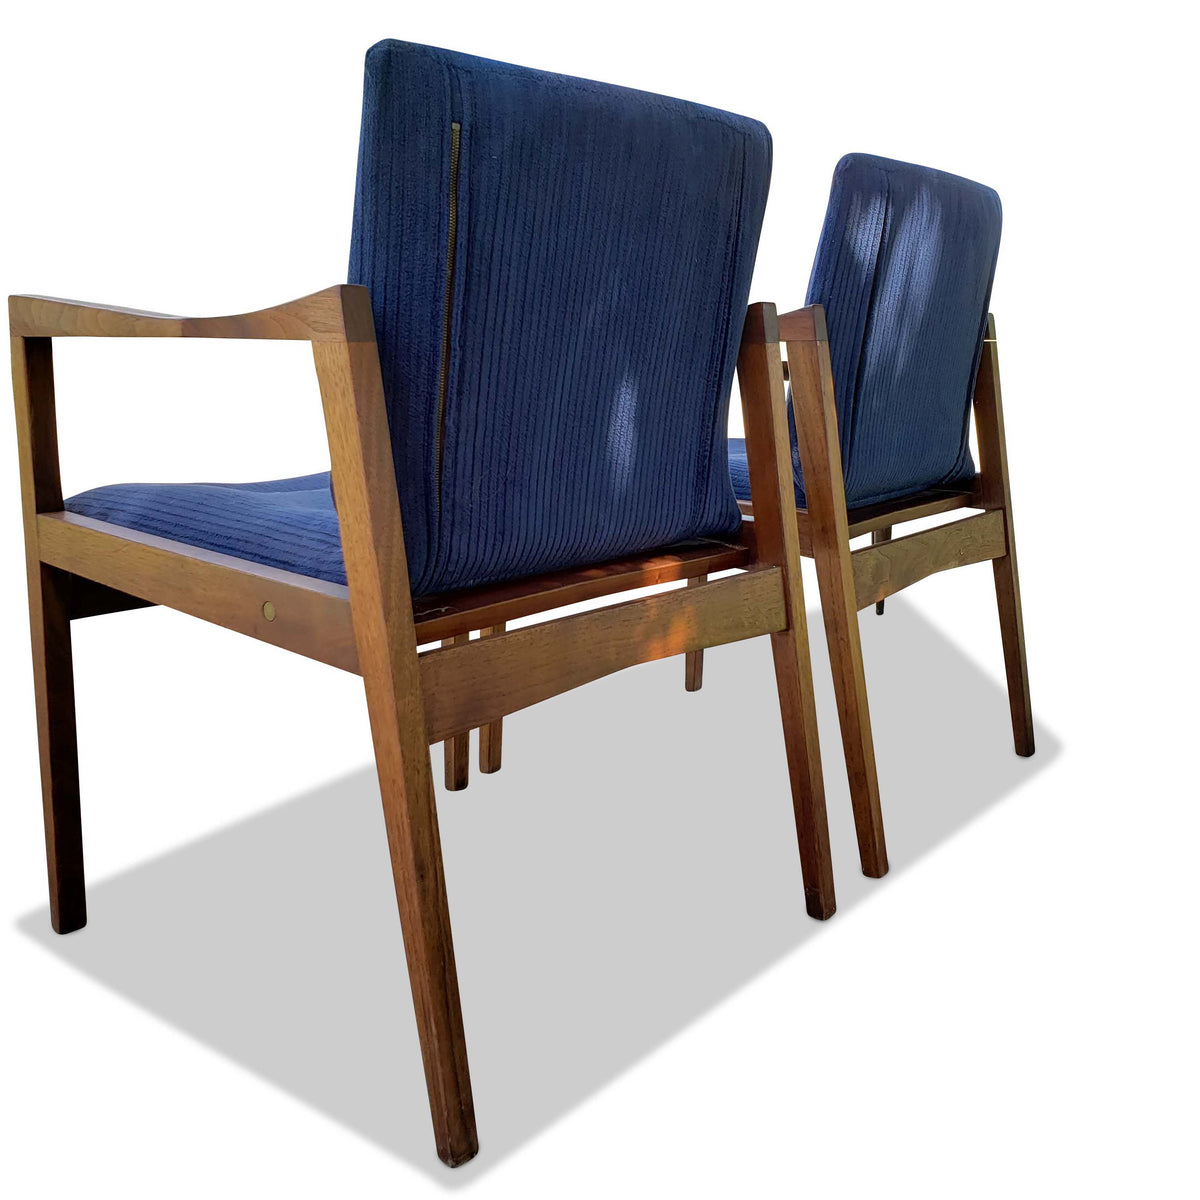 Pair of Mid-Century Lounge Chairs by Walter Nugent